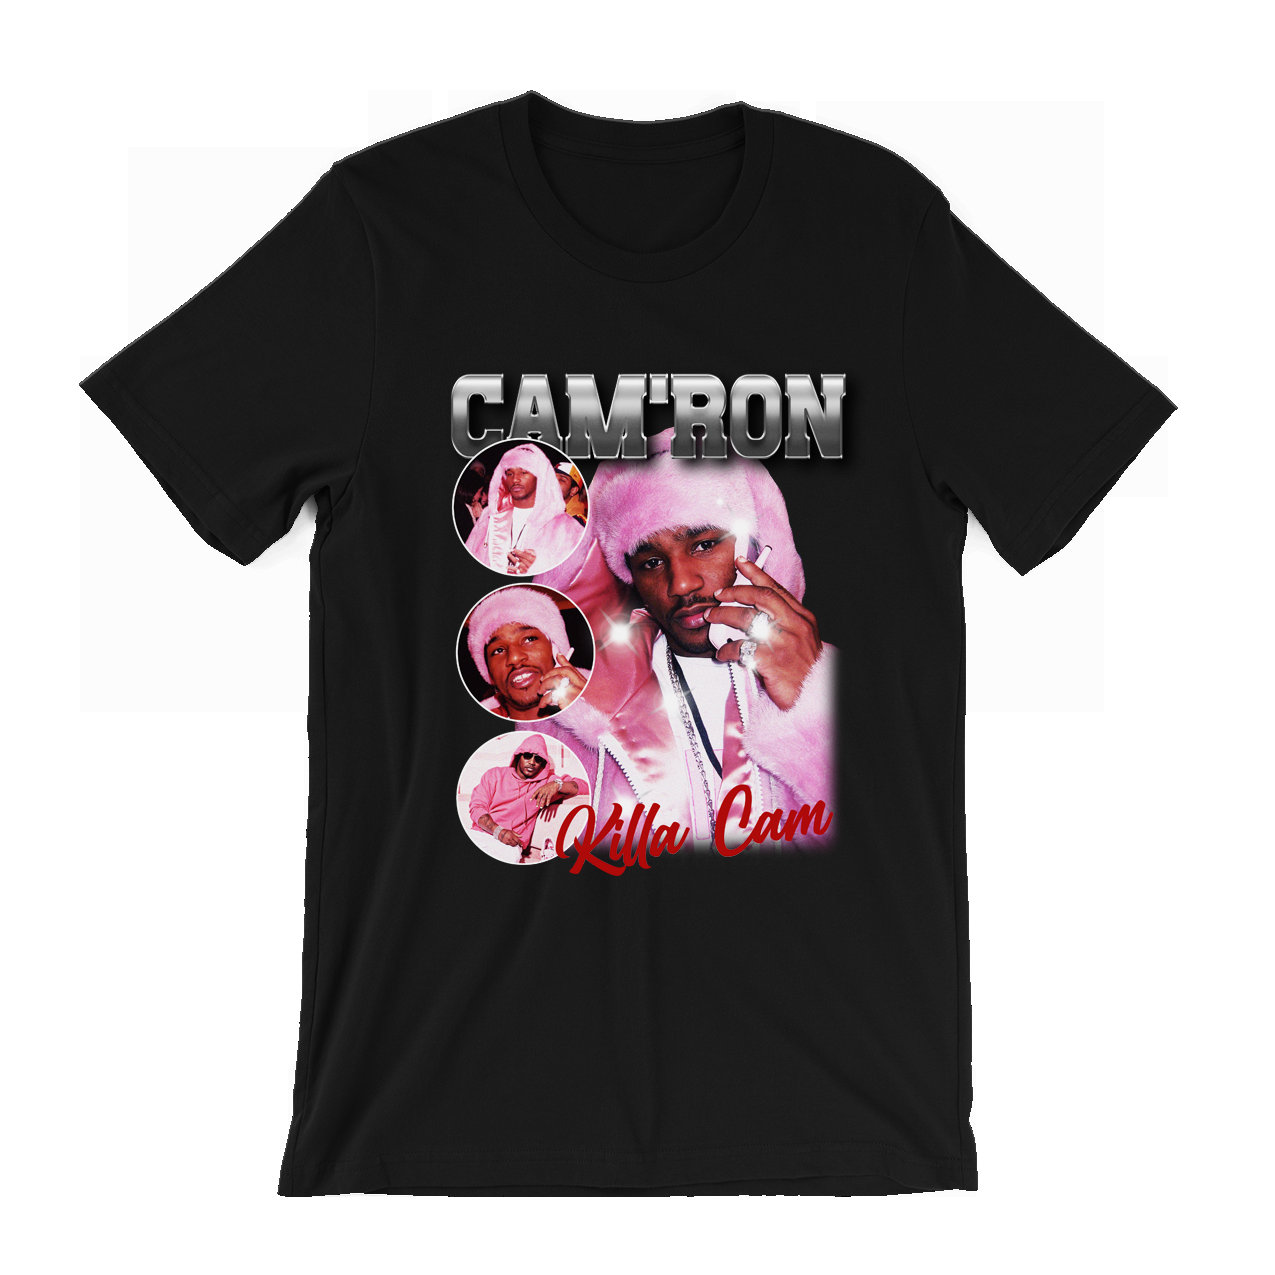 DIPSET OFFICIAL CAMRON Tシャツ